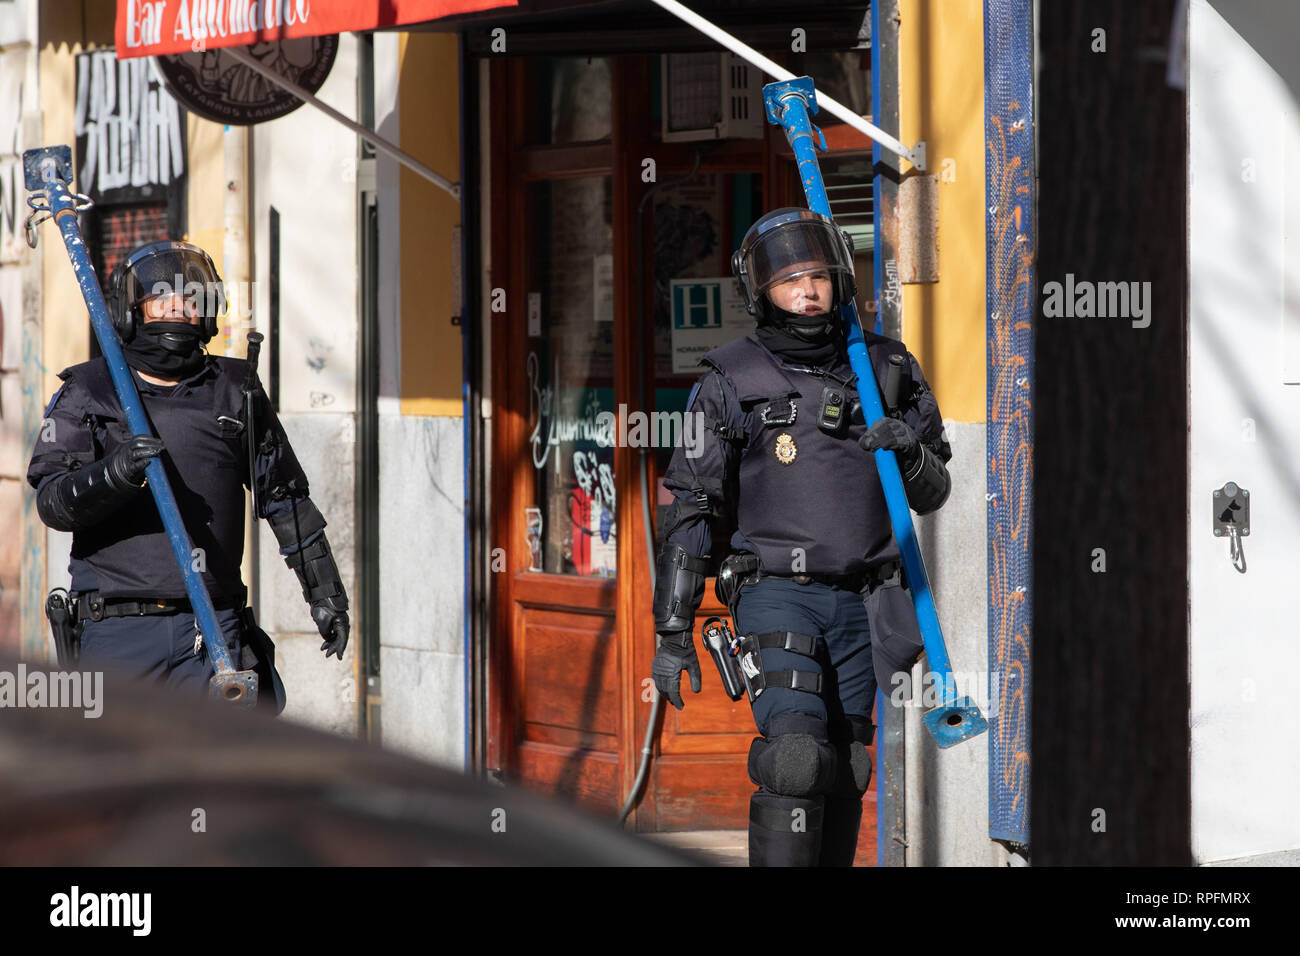 Madrid, Spain. 22nd Feb 2019. Pepi, Rosi, Juani and Mayra have had to leave their homes located at 11 Argumosa street in Madrid. The National Police has finally enforced the three judicial orders despite the pressure exerted by activists who have gathered there. The police remove the containment beams from the entrance to the building to avoid eviction. Credit: Jesús Hellin/Alamy Live News Stock Photo